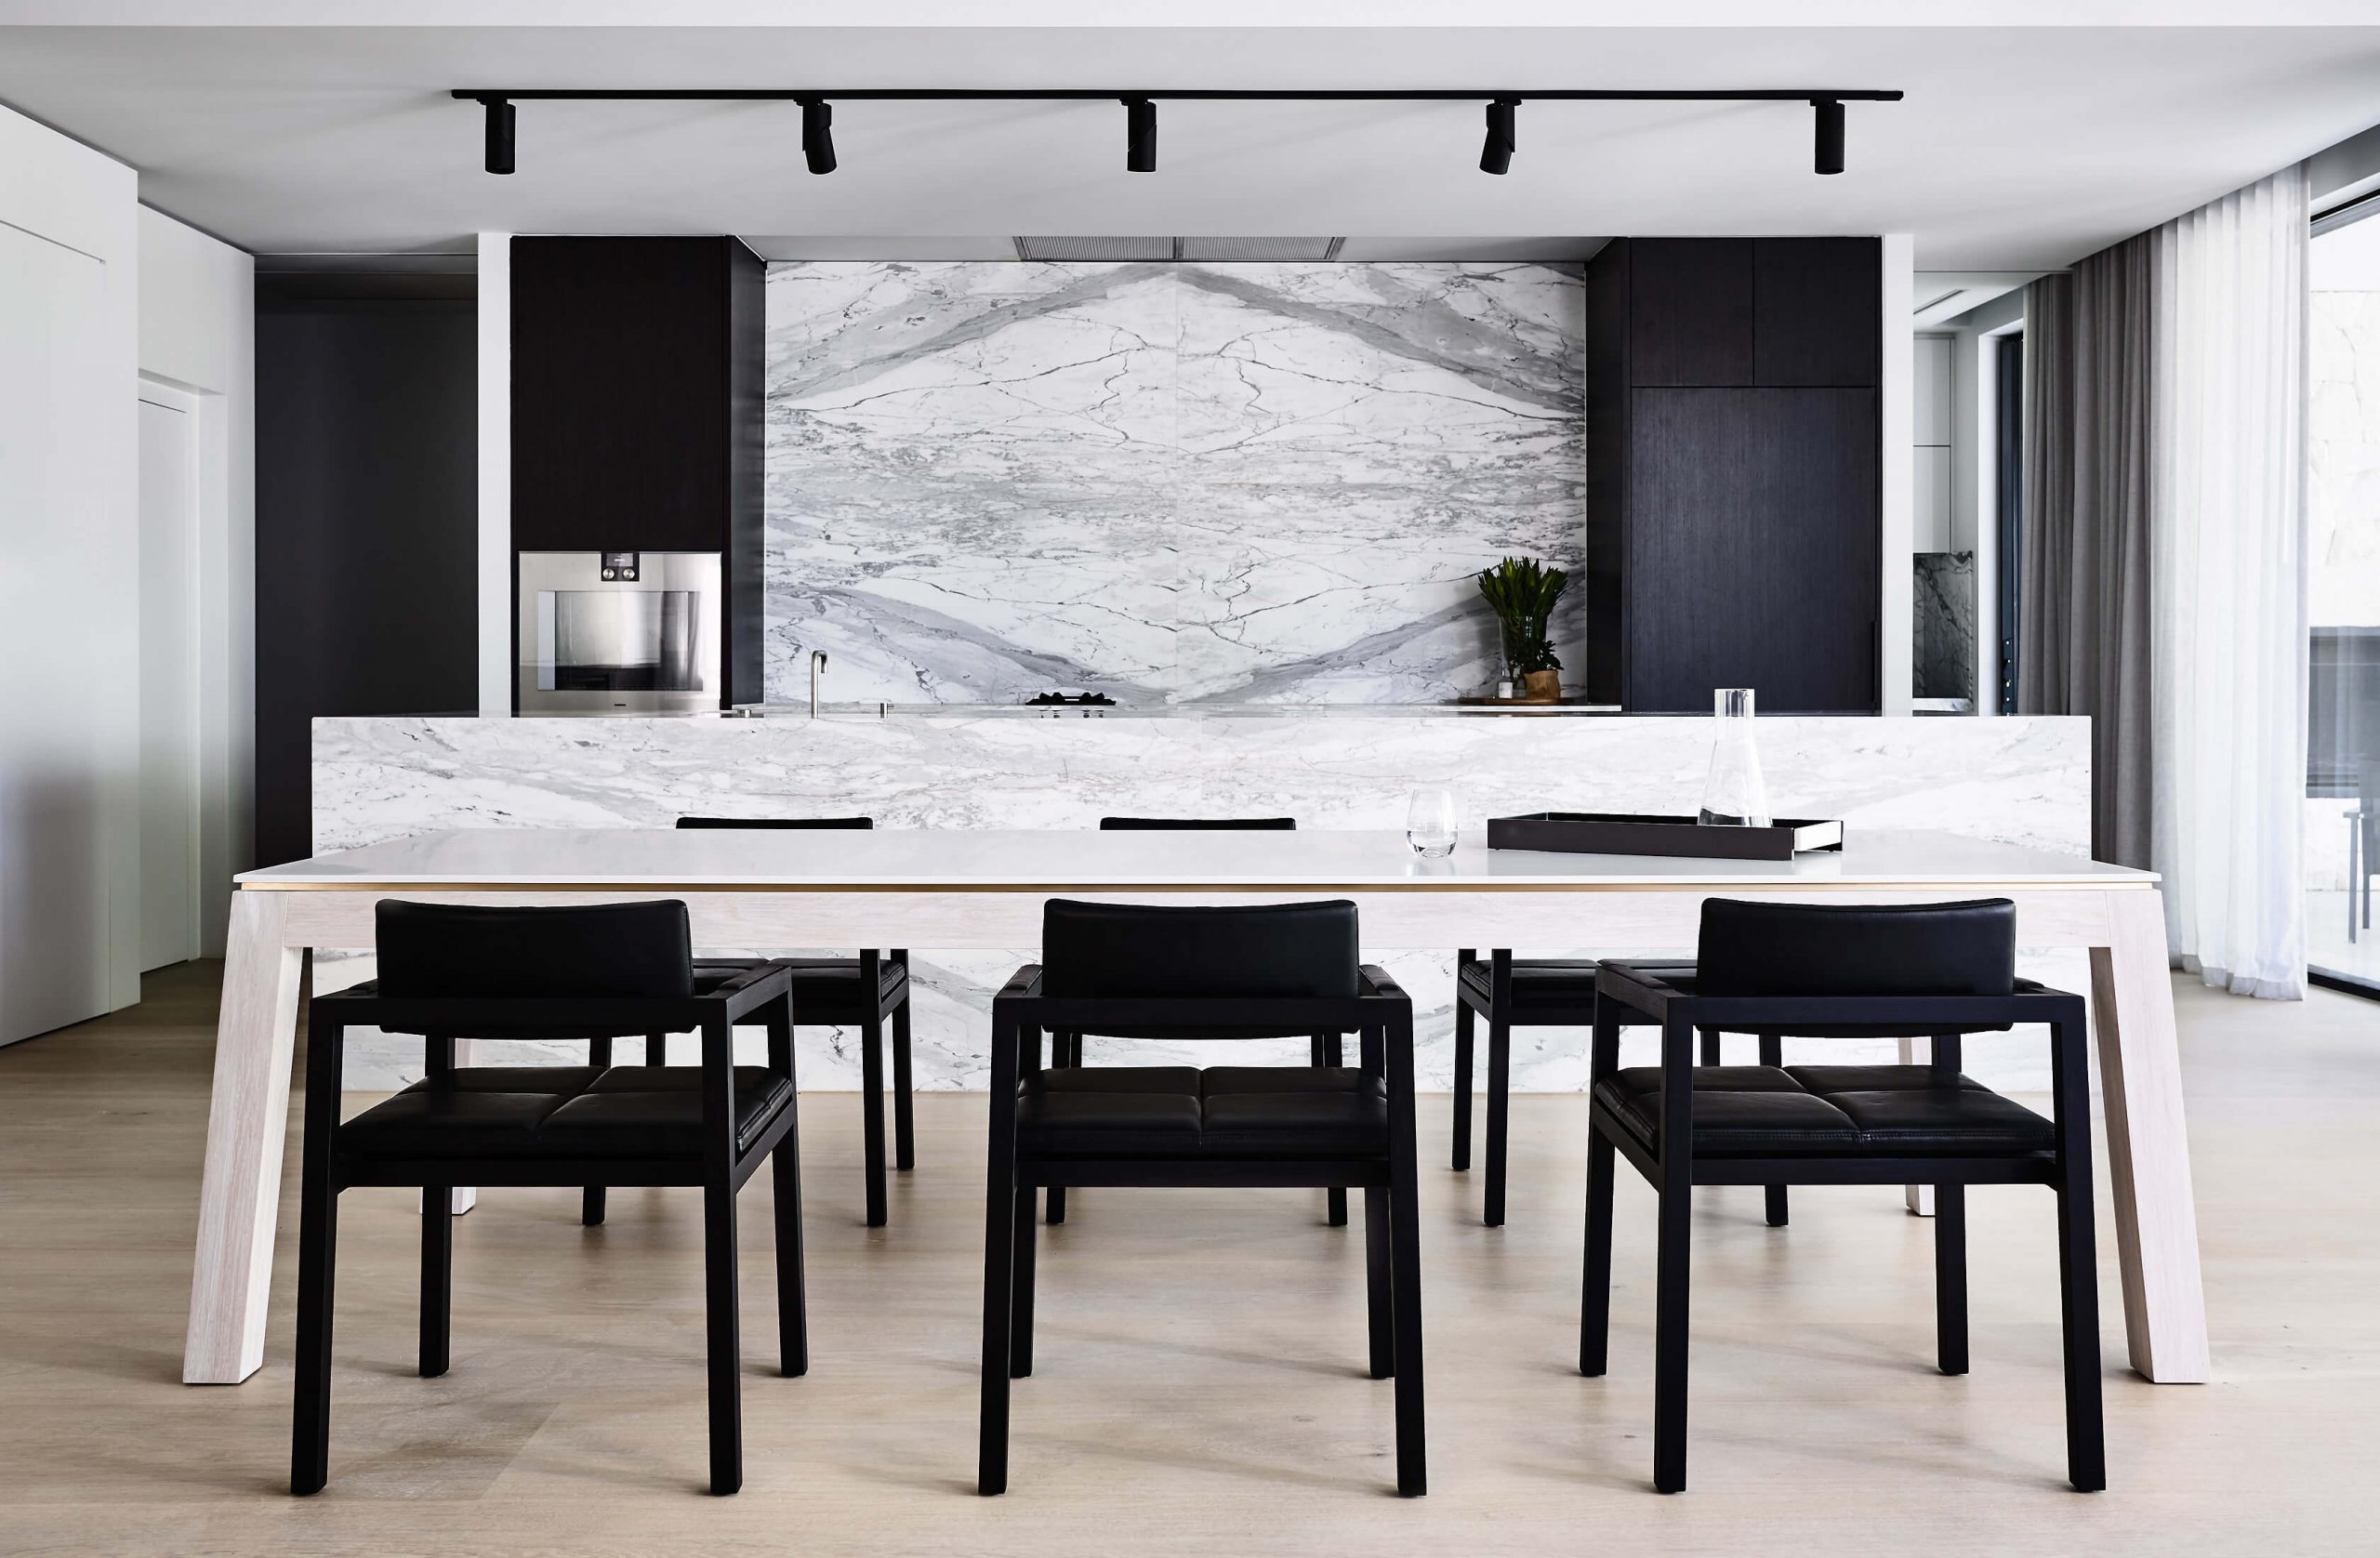 The beautiful marble back splash back in this dining setting is a hero feature not overpowered by the elegancy of the balance designer dining table set by Australian designer FrancoCrea